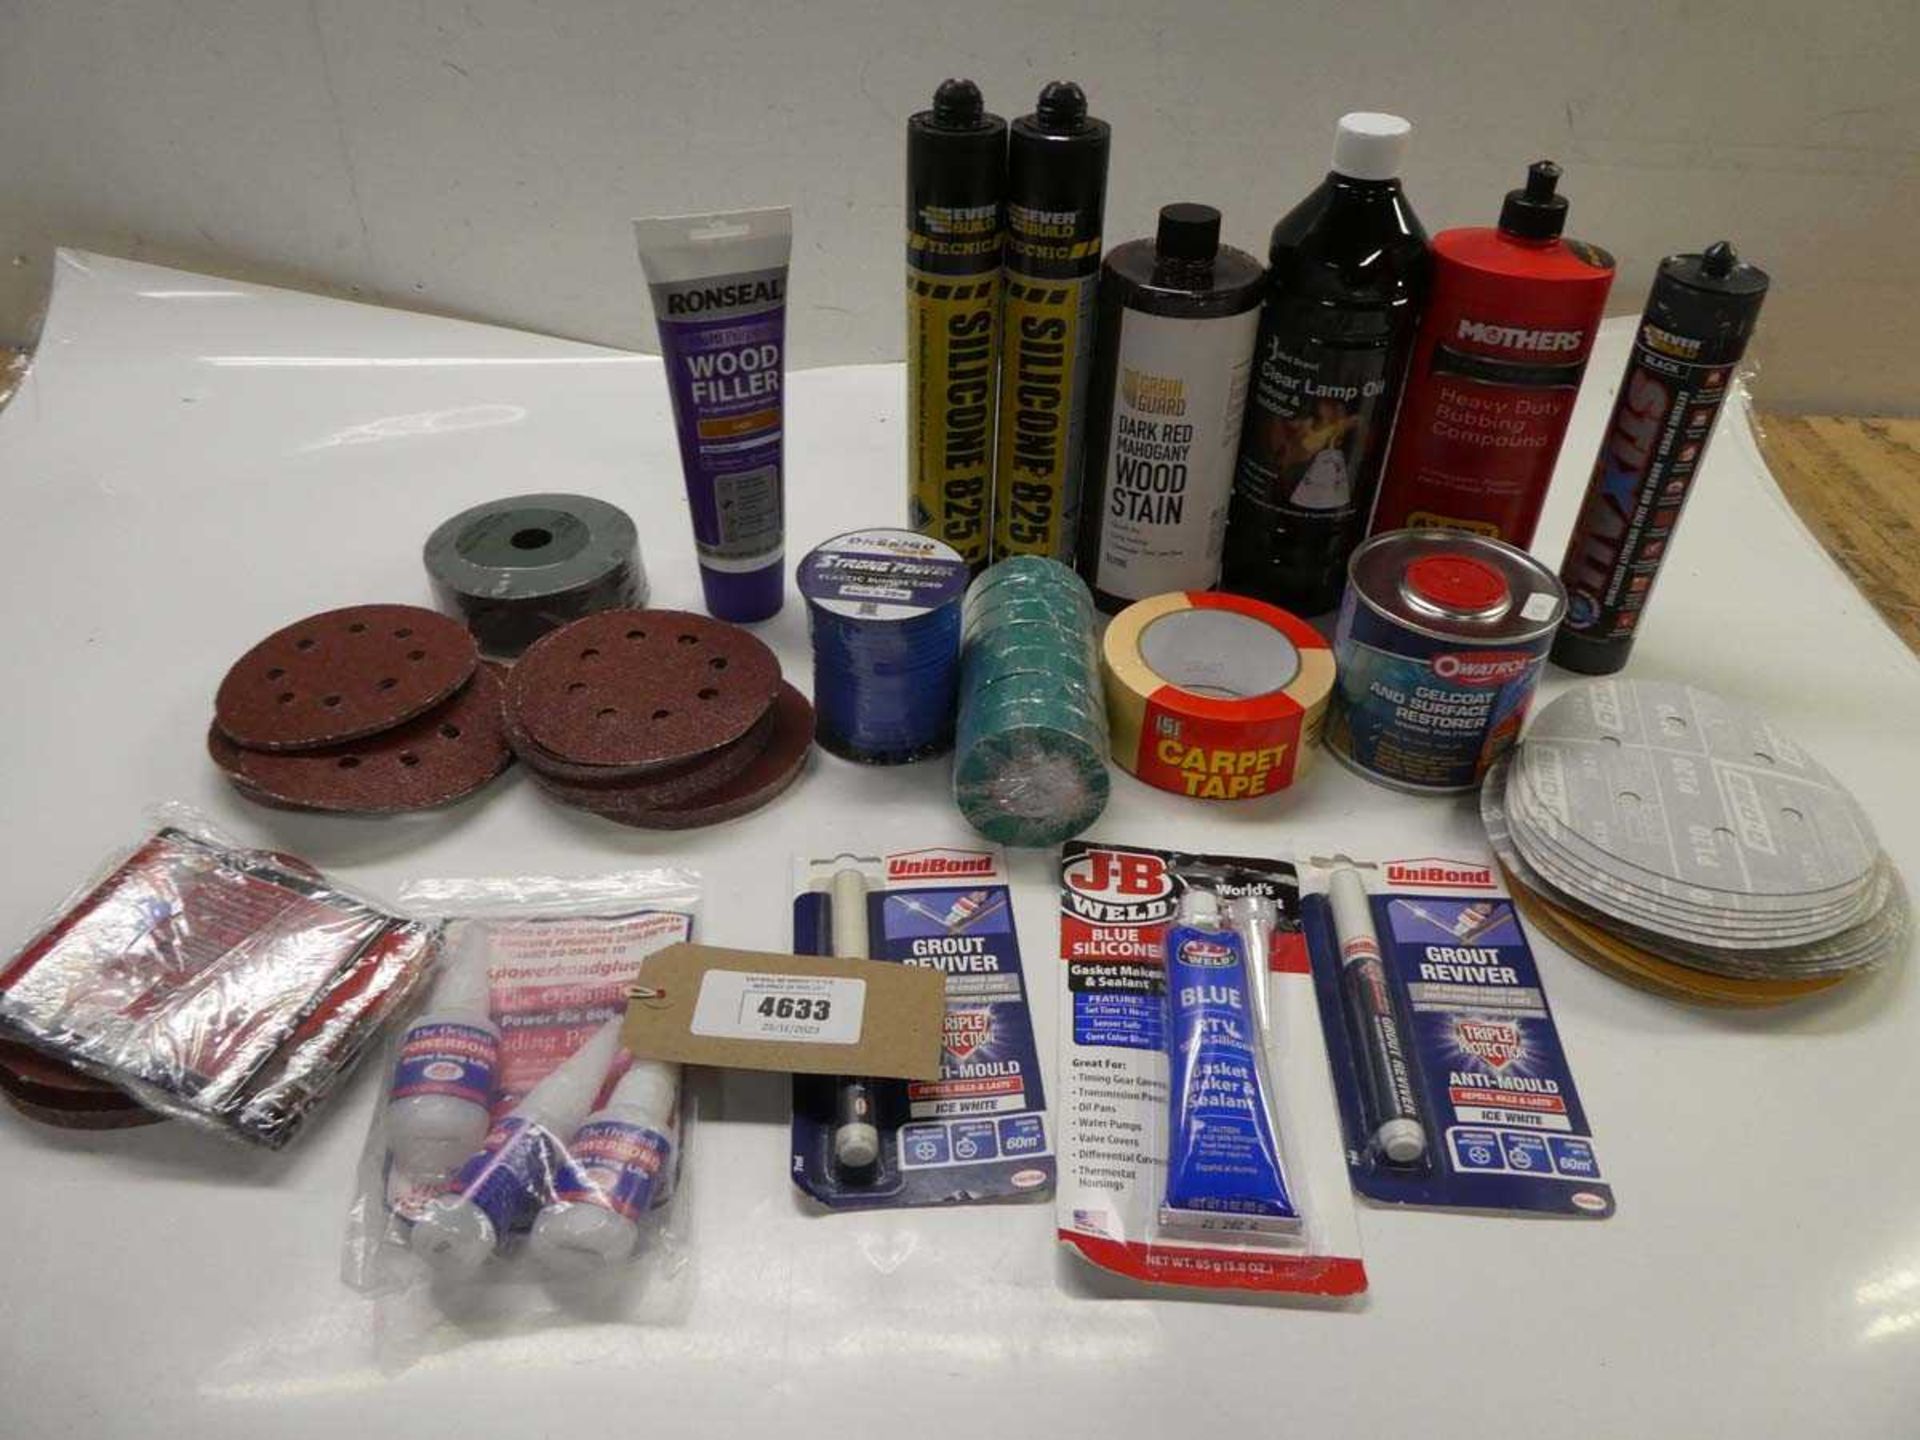 +VAT Silicone, Wood stain, rubbing compound, wood filler, carpet tape, sanding & cutting discs,